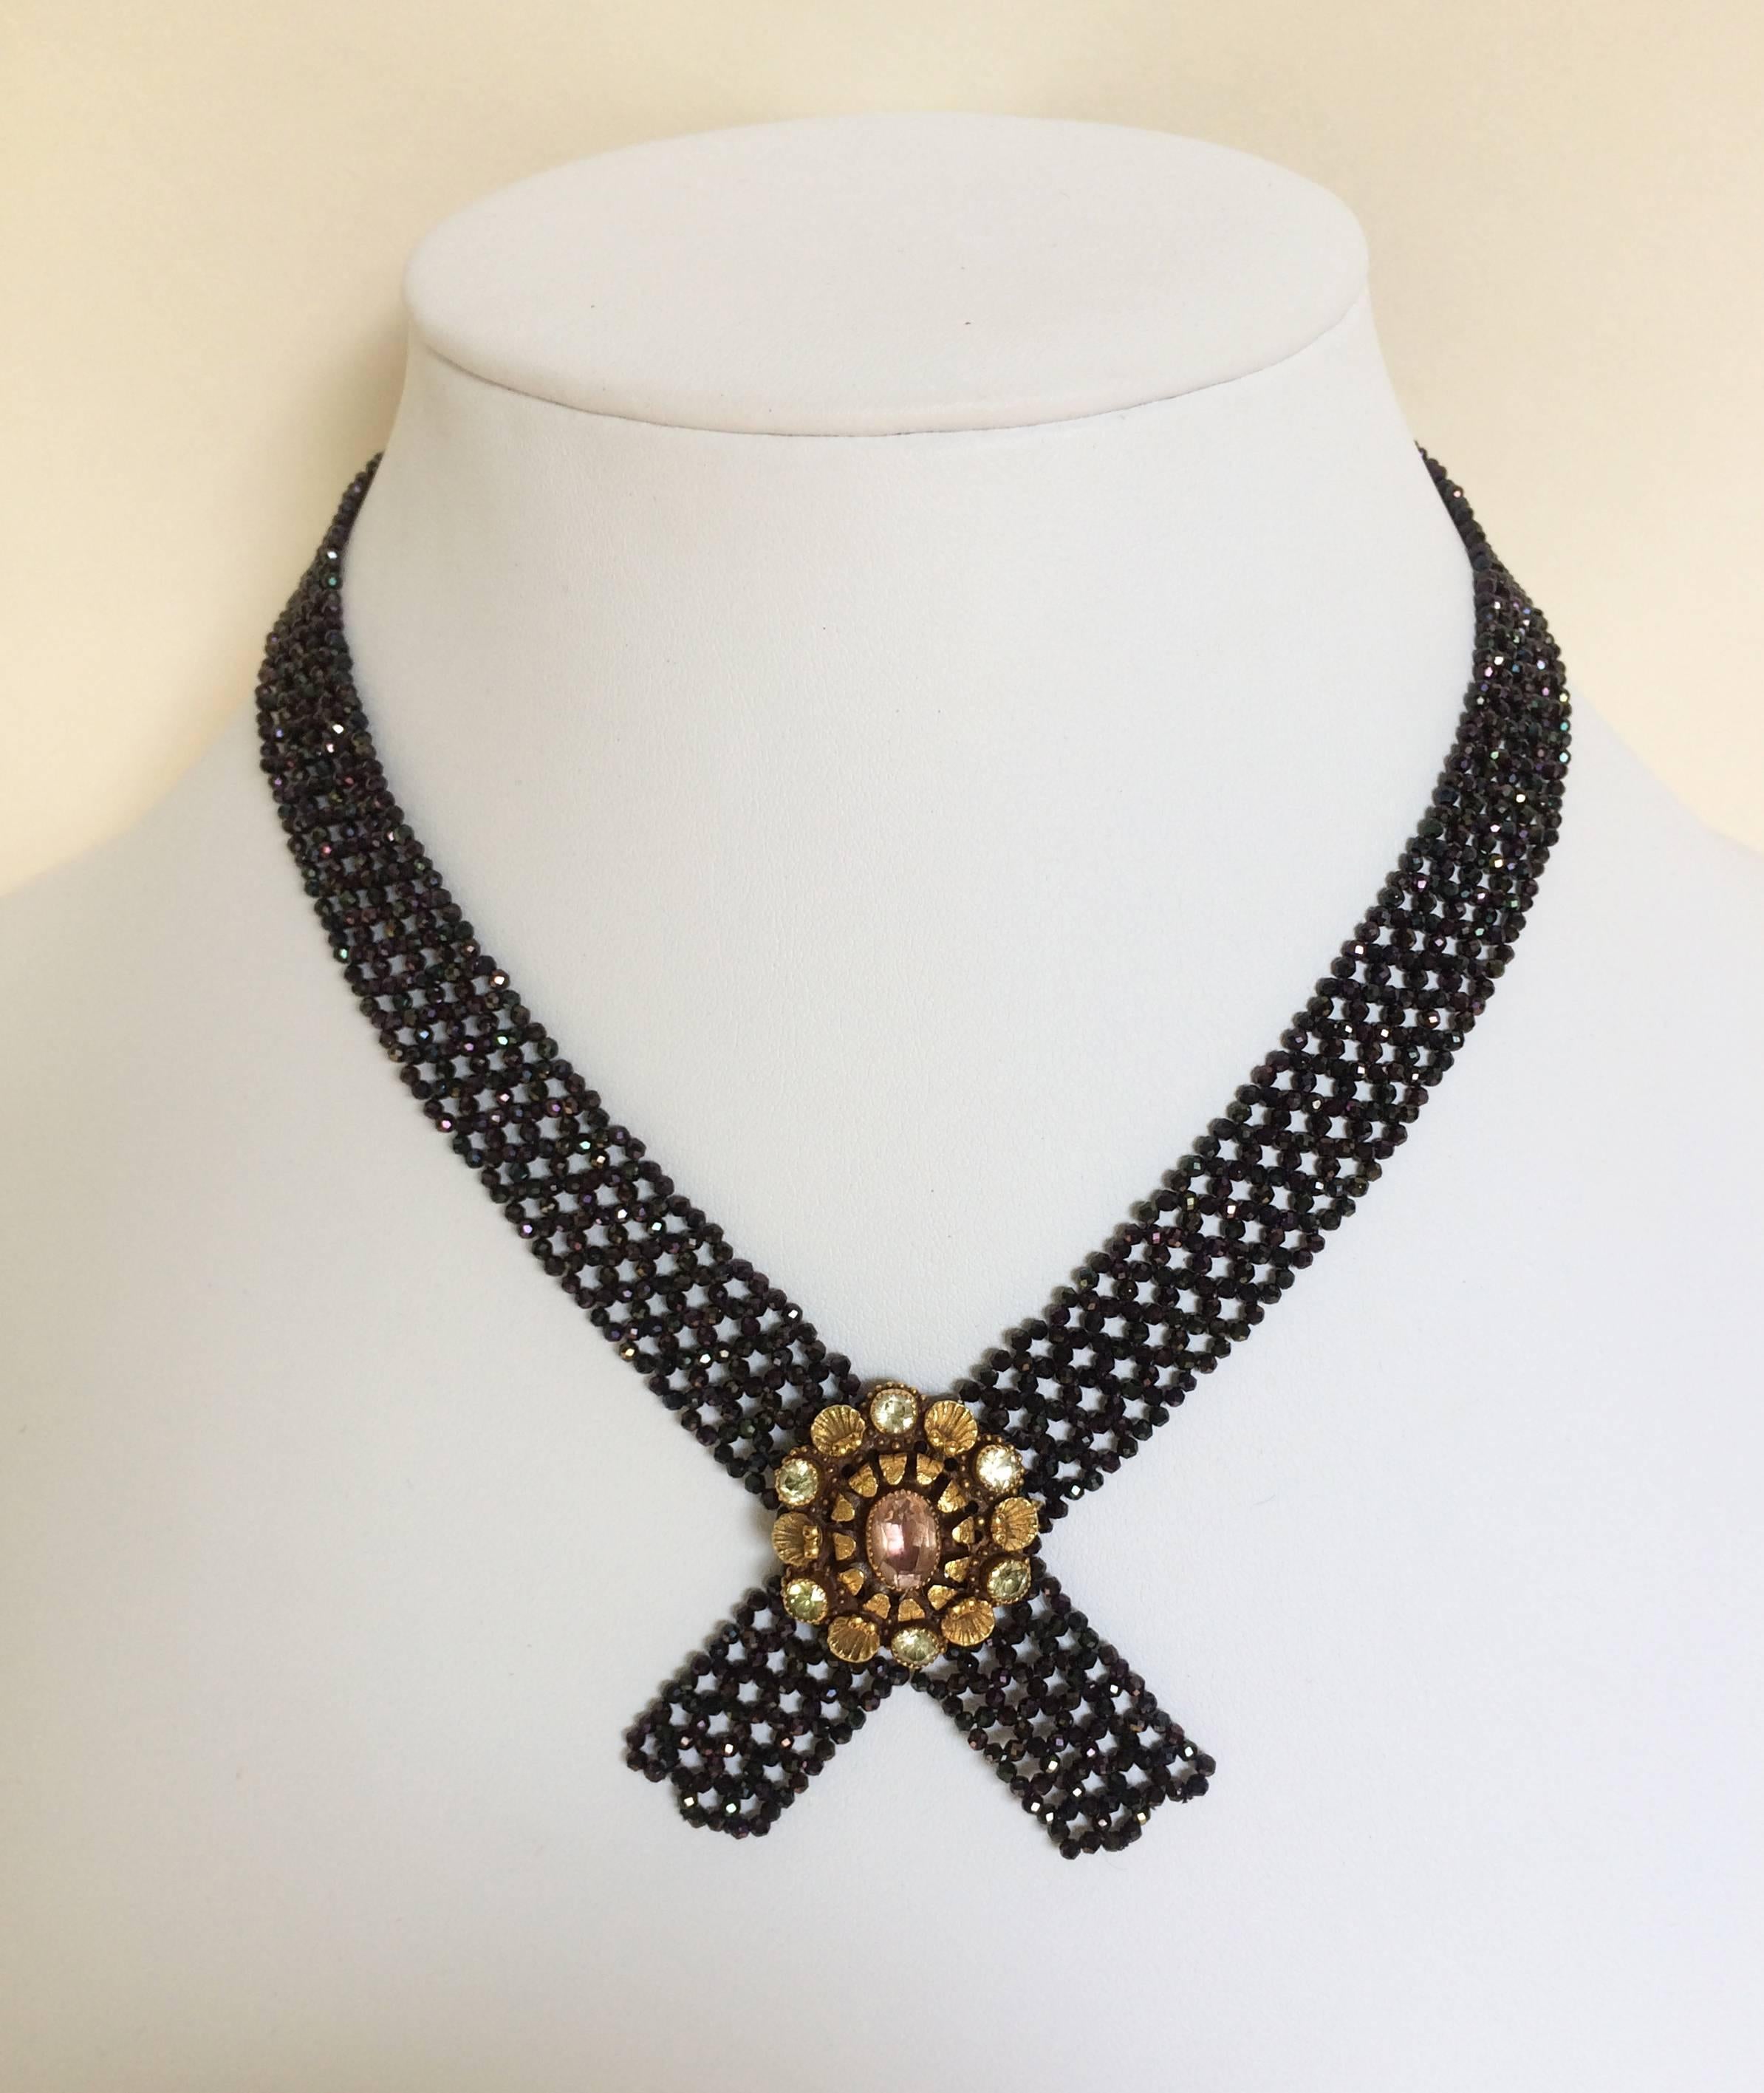 Marina J Black Spinel Collar Necklace with a 14 k Yellow Gold Clasp 2